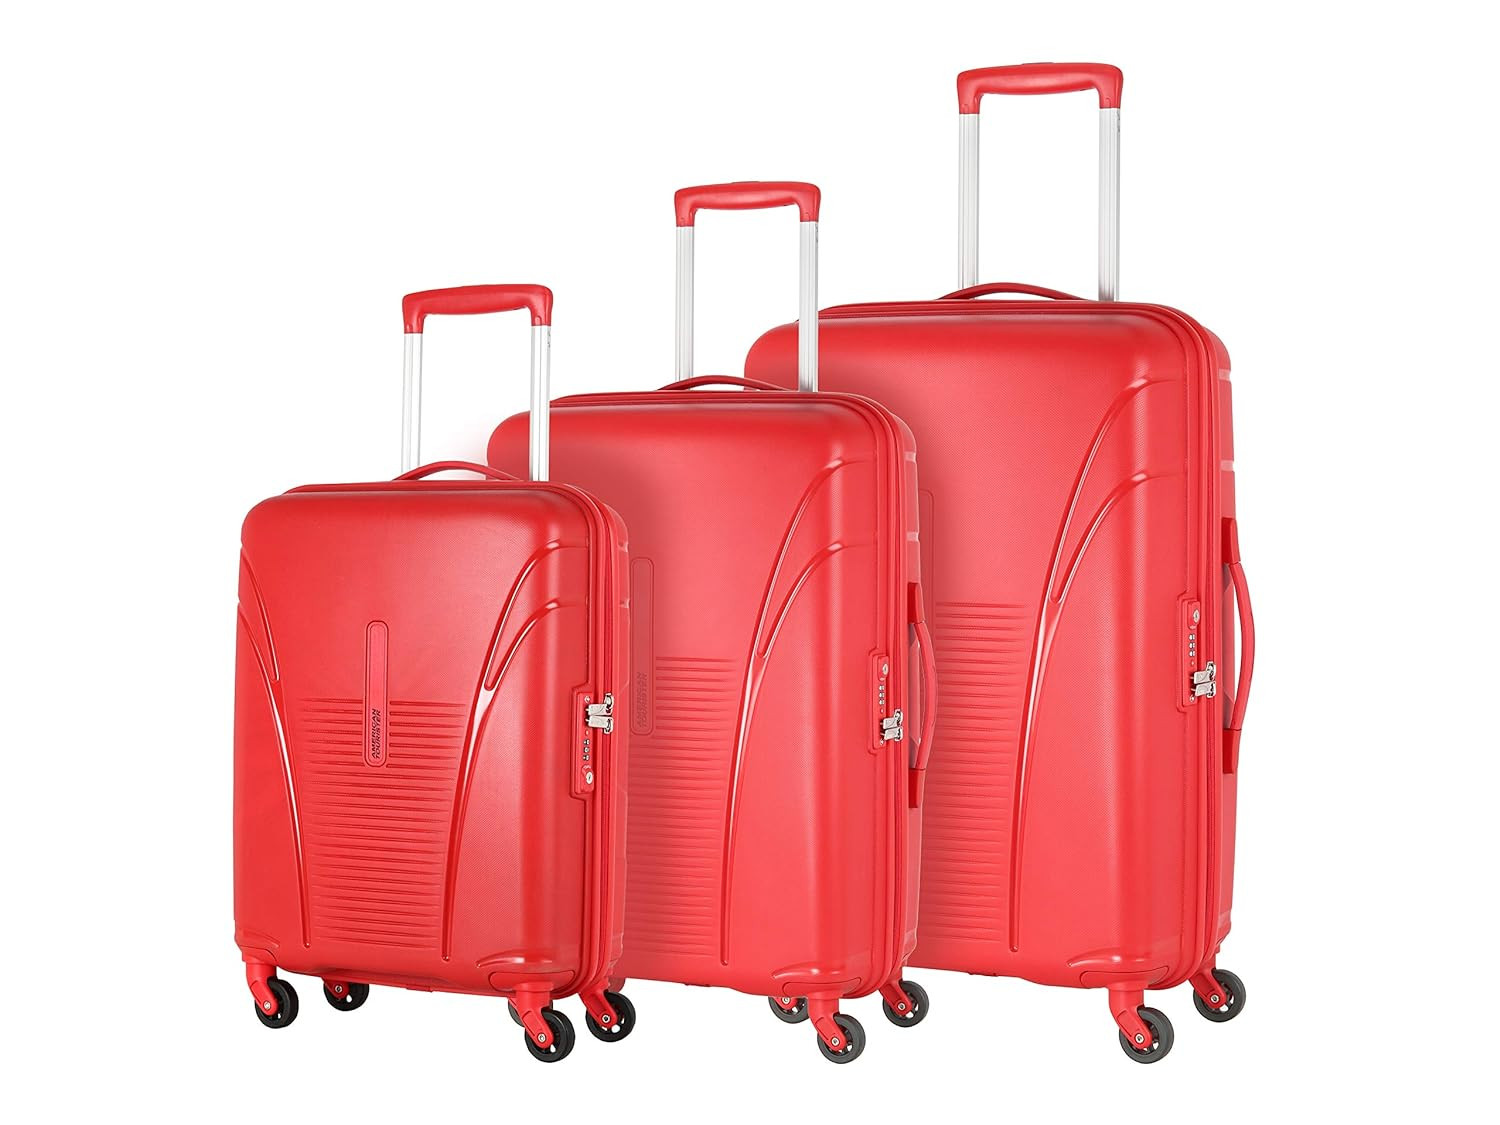 American Tourister Ivy 3 Pc Set 55 Cms 68 Cms  77 Cms Small Medium  Large Polypropylene PP Hard Sided 4 Spinner Wheels LuggageTrolley Bag with TSA Lock Red